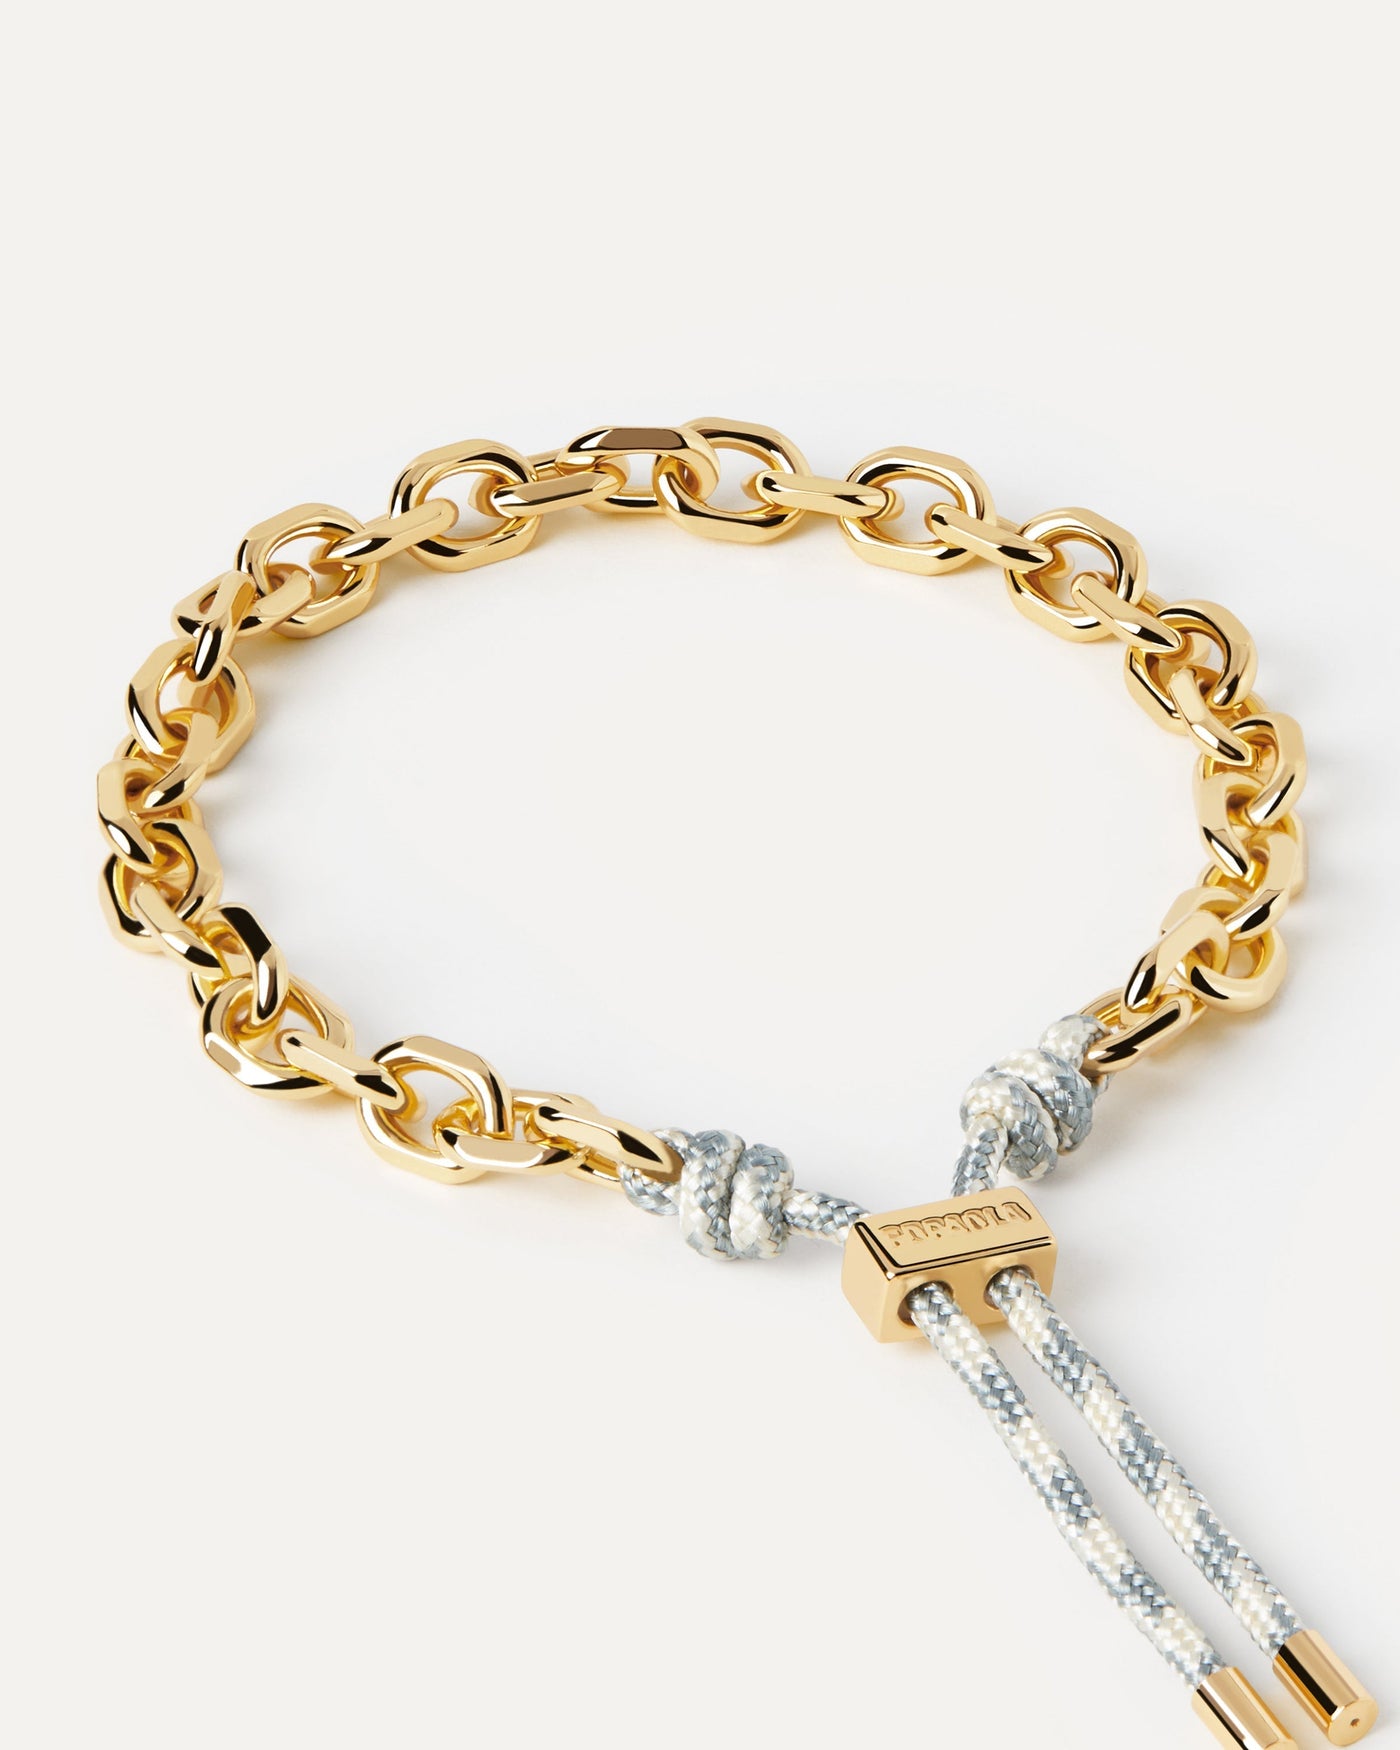 2023 Selection | Sky Essential Rope and Chain Bracelet. Silver chain bracelet with interwined blue and white rope and adjustable sliding clasp. Get the latest arrival from PDPAOLA. Place your order safely and get this Best Seller. Free Shipping.